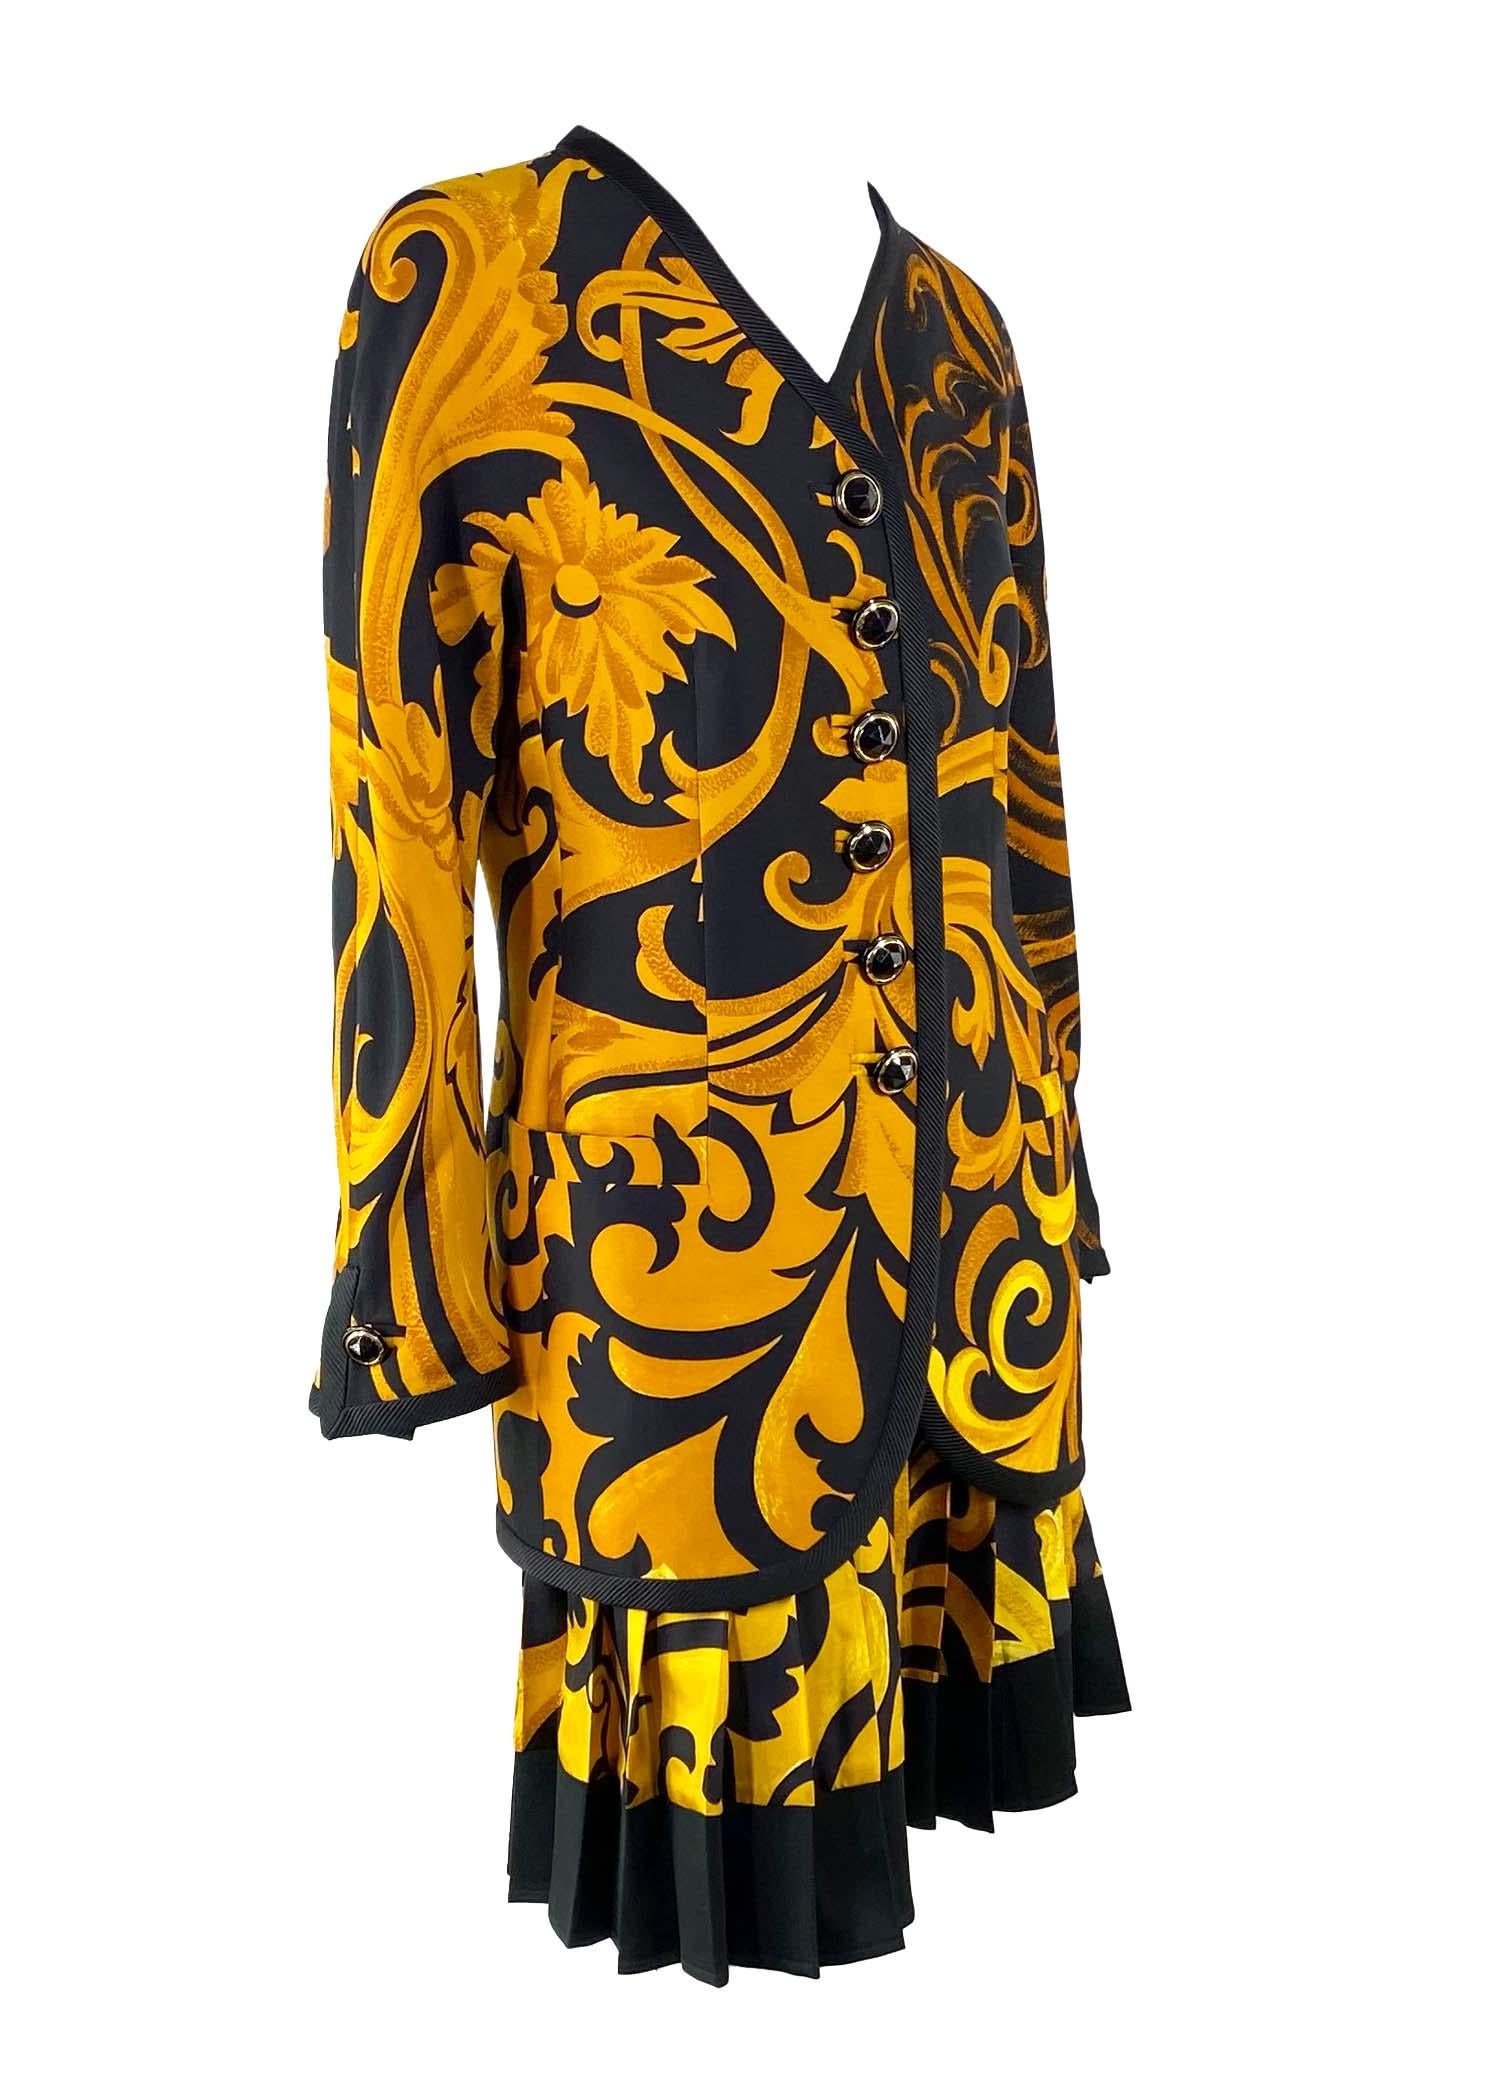 F/W 1991 Gianni Versace Couture Black Gold Baroque Print Silk Pleated Skirt Suit In Excellent Condition For Sale In West Hollywood, CA